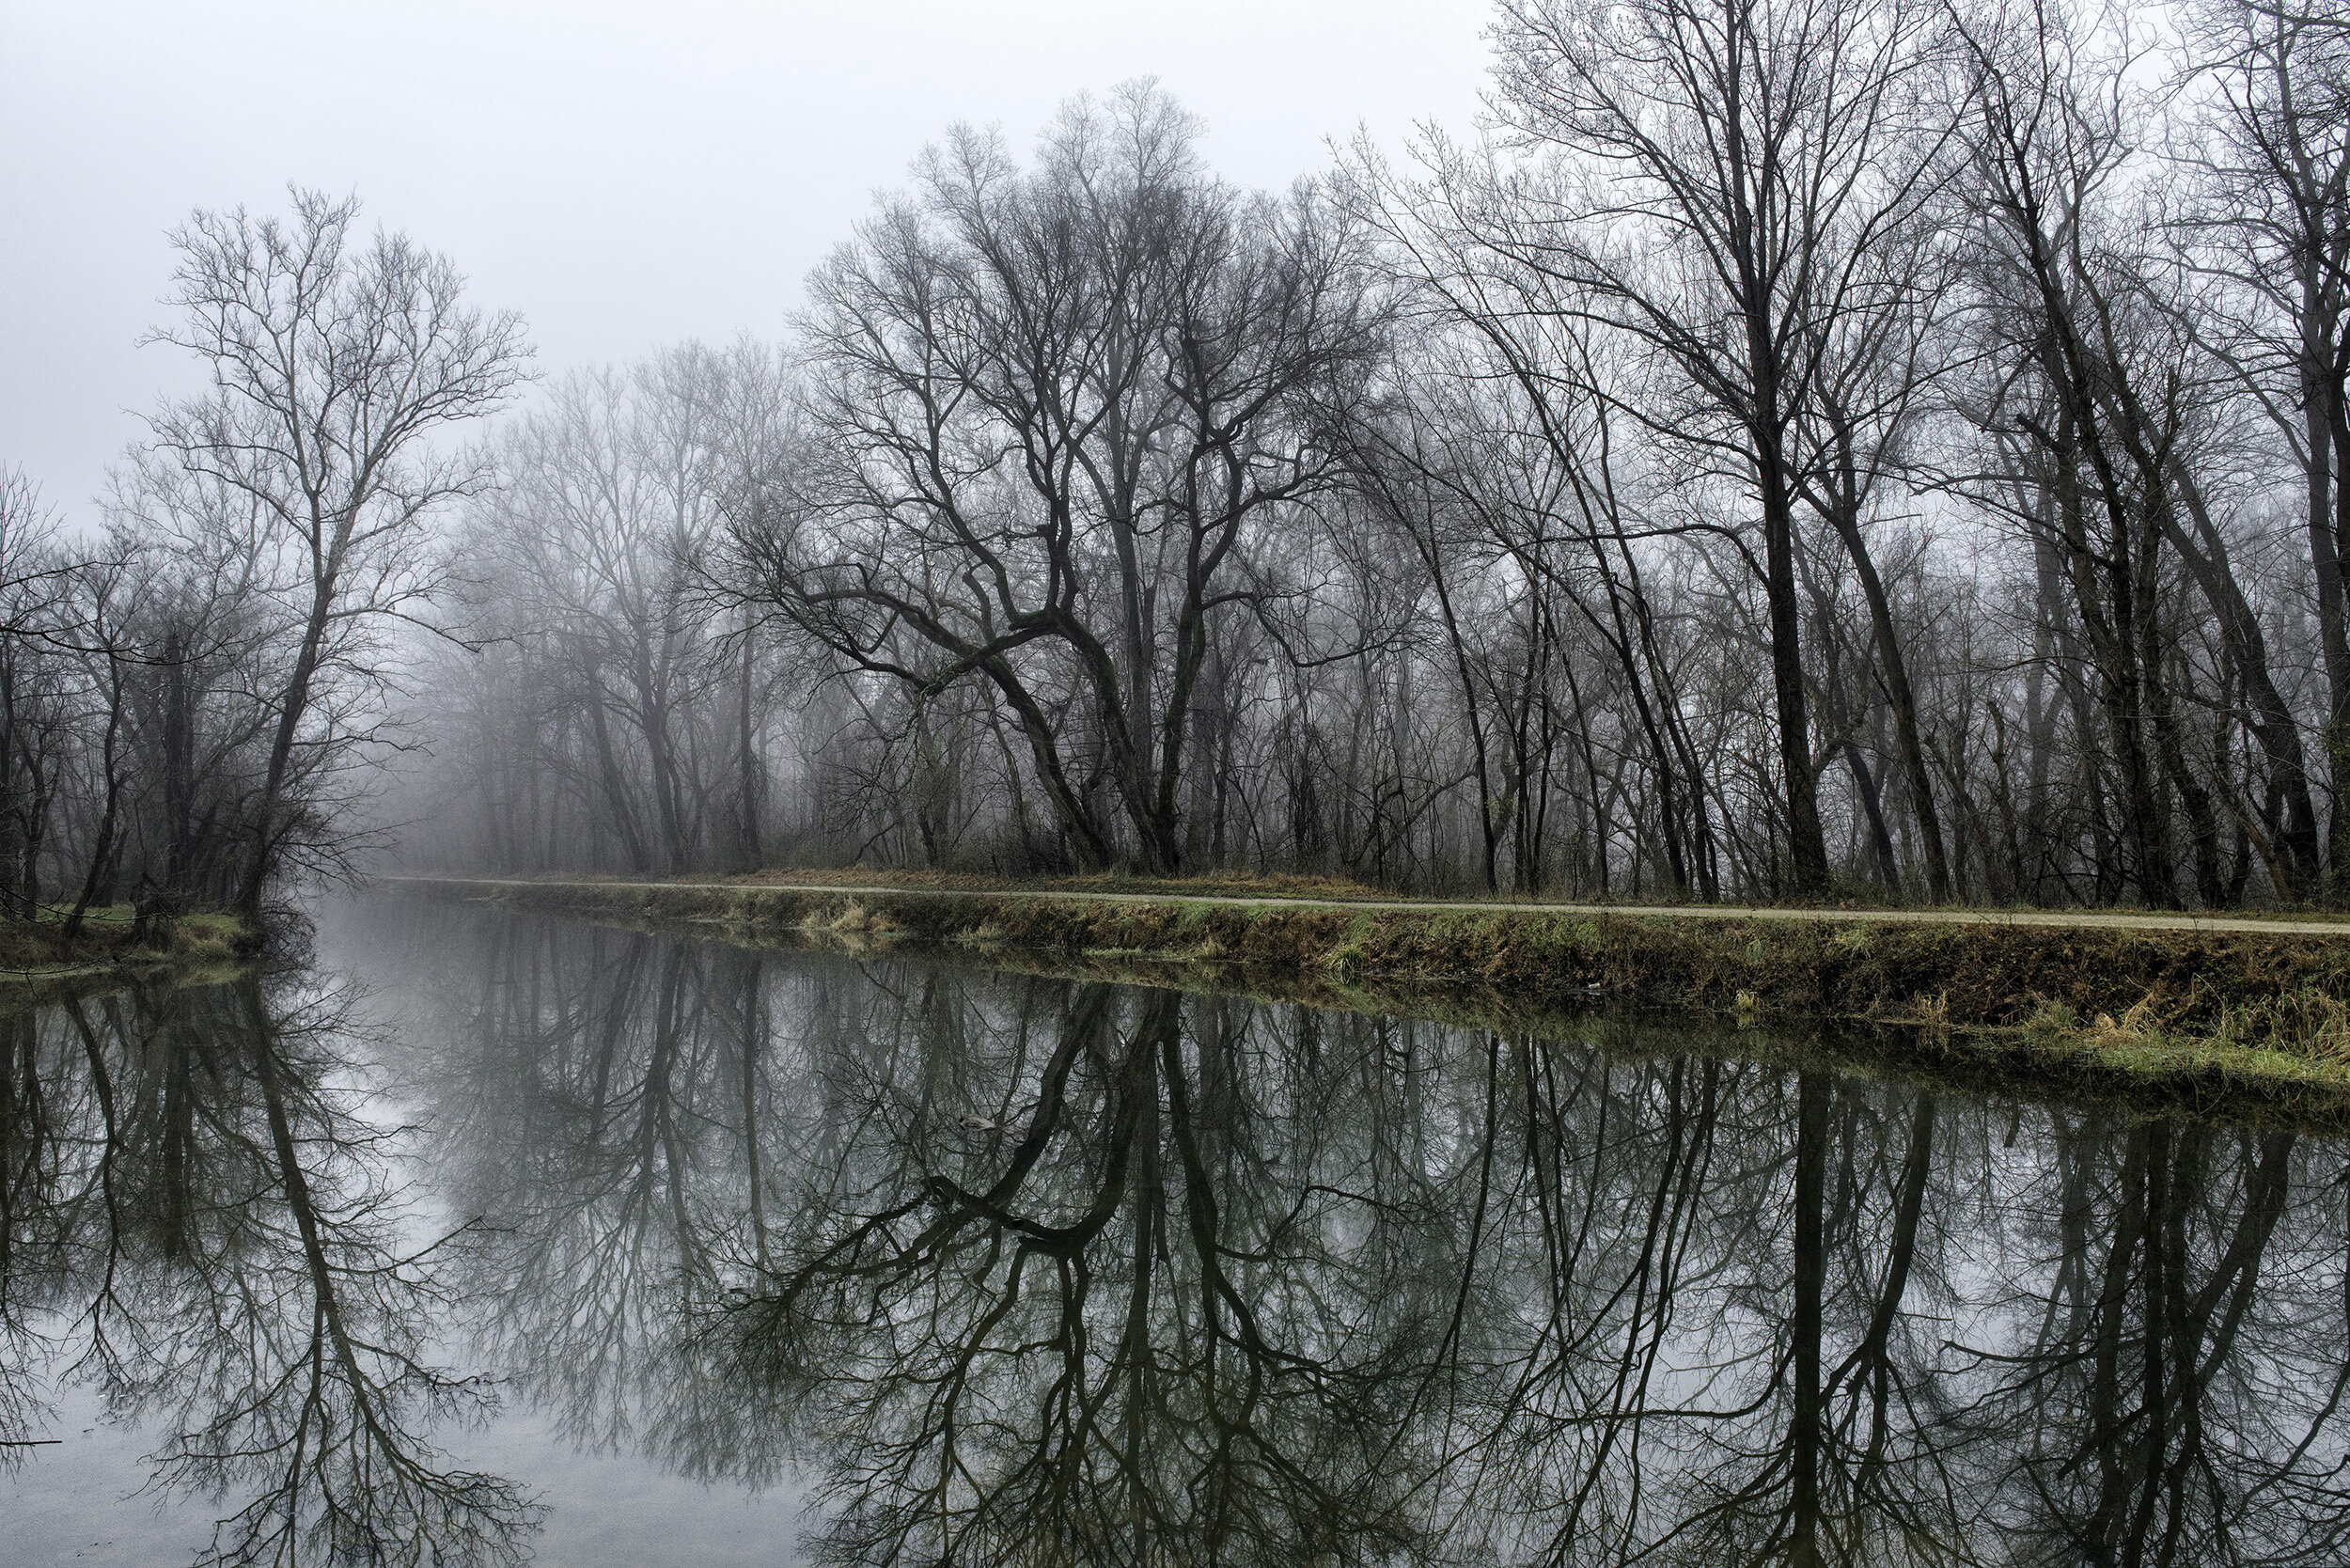 January Morning at Pennyfield Lock, C&O Canal 50th Anniversary Exhibit (Awarded First Place)